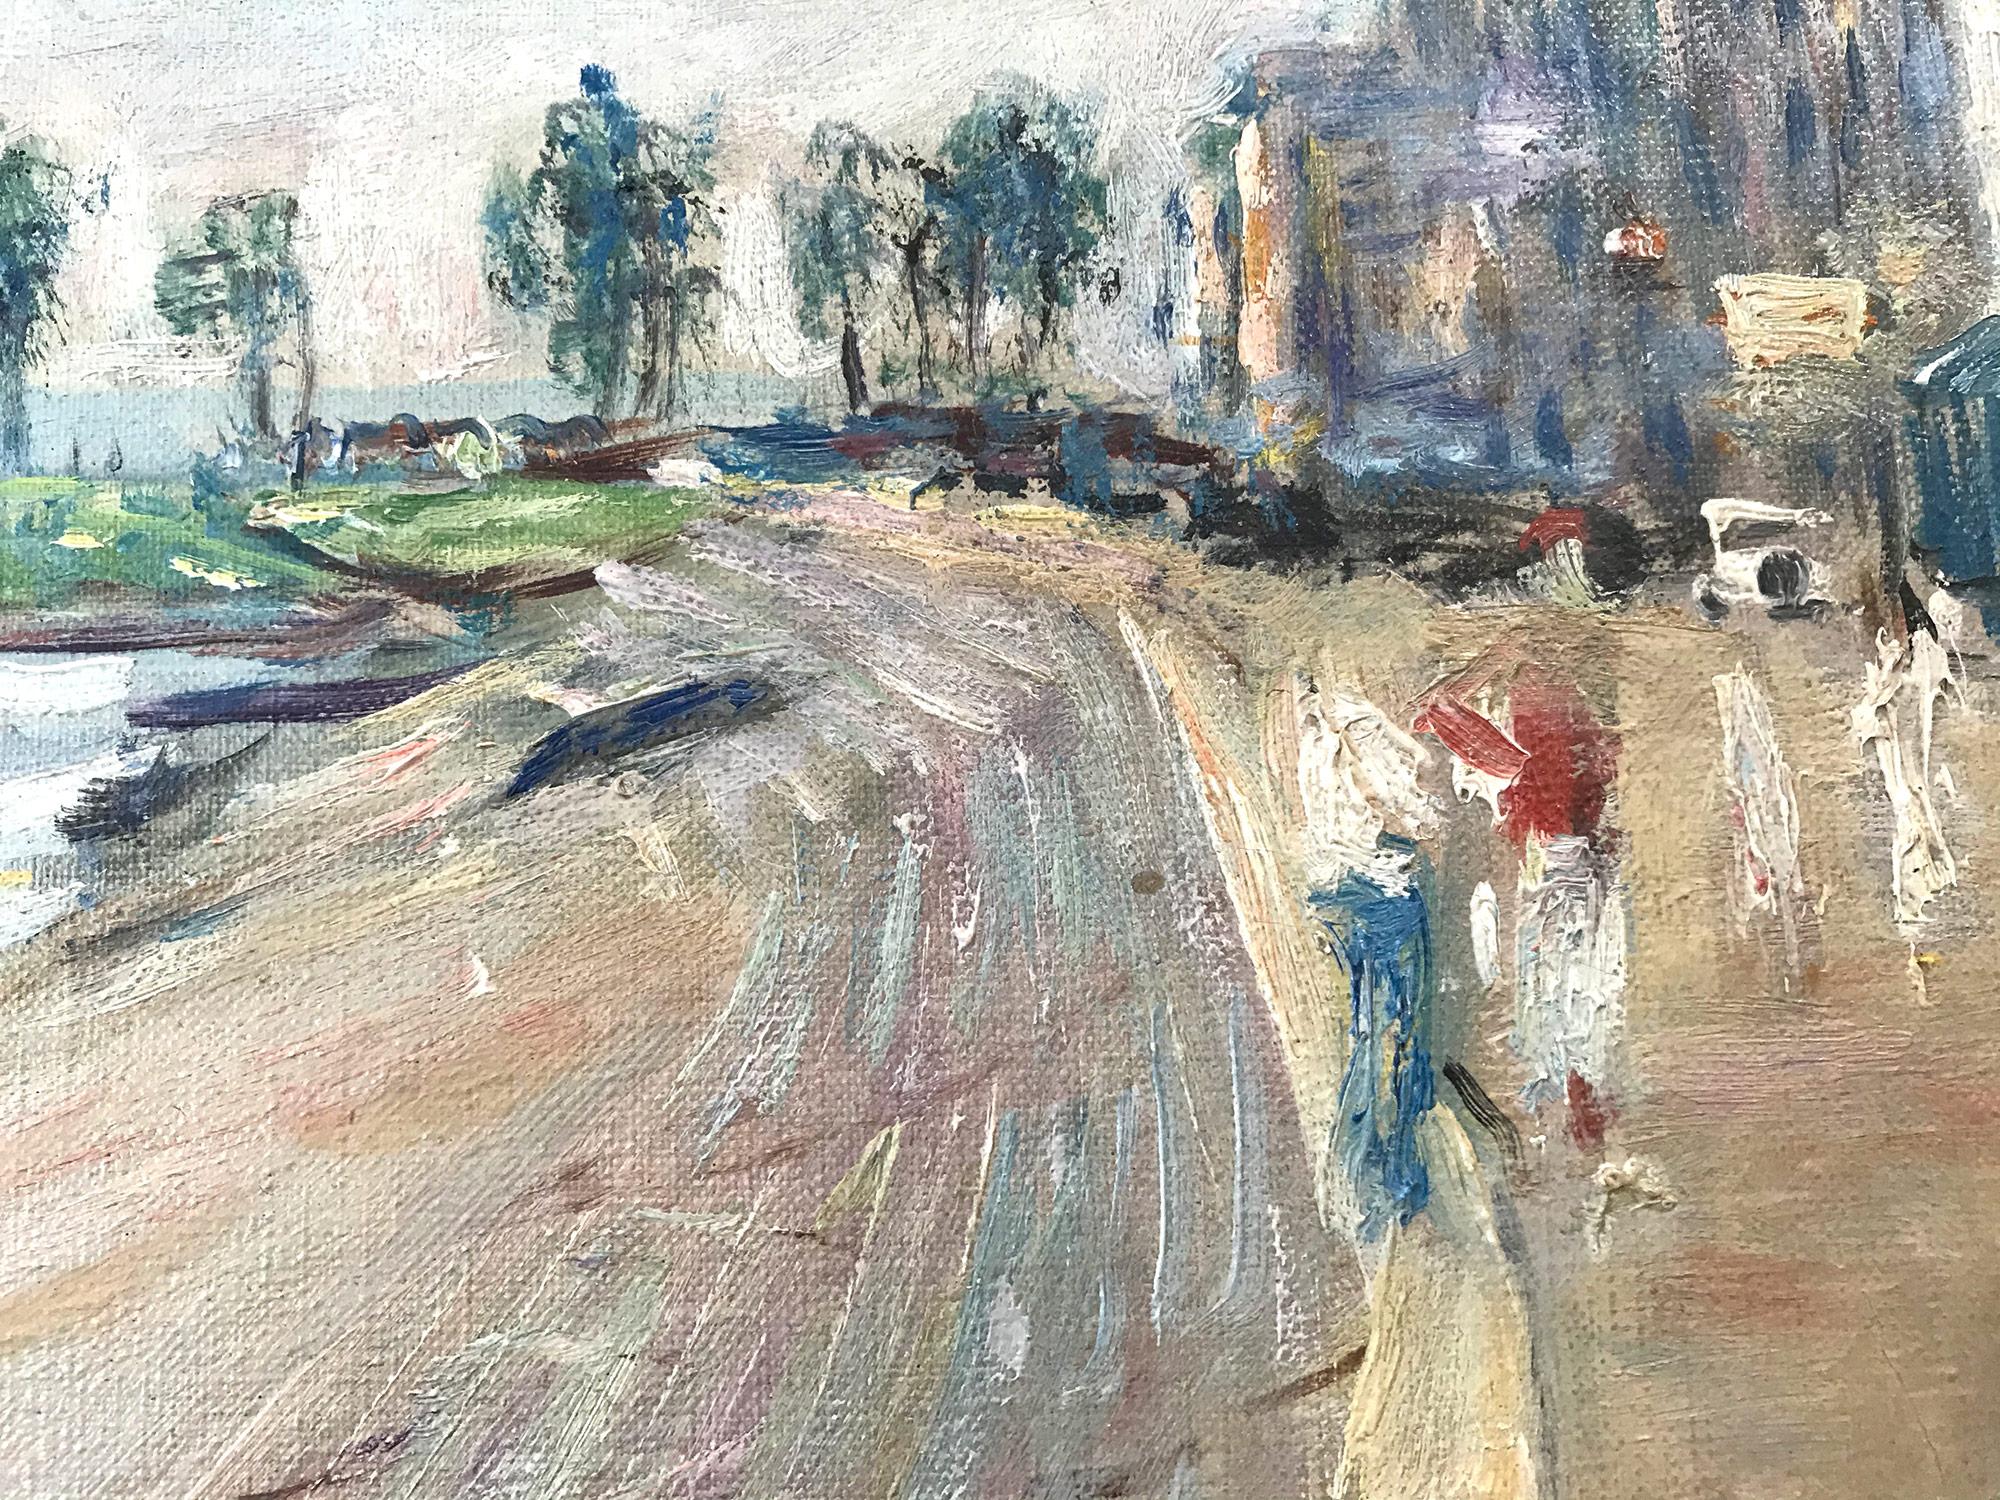 This work by Lucien Adrion is a wonderful representation of his impressionistic works at the Promenade en bord de Mer à Saint-Valéry. Using a bright palette of colors, Adrion executes this piece with much attention to detail with figures situated